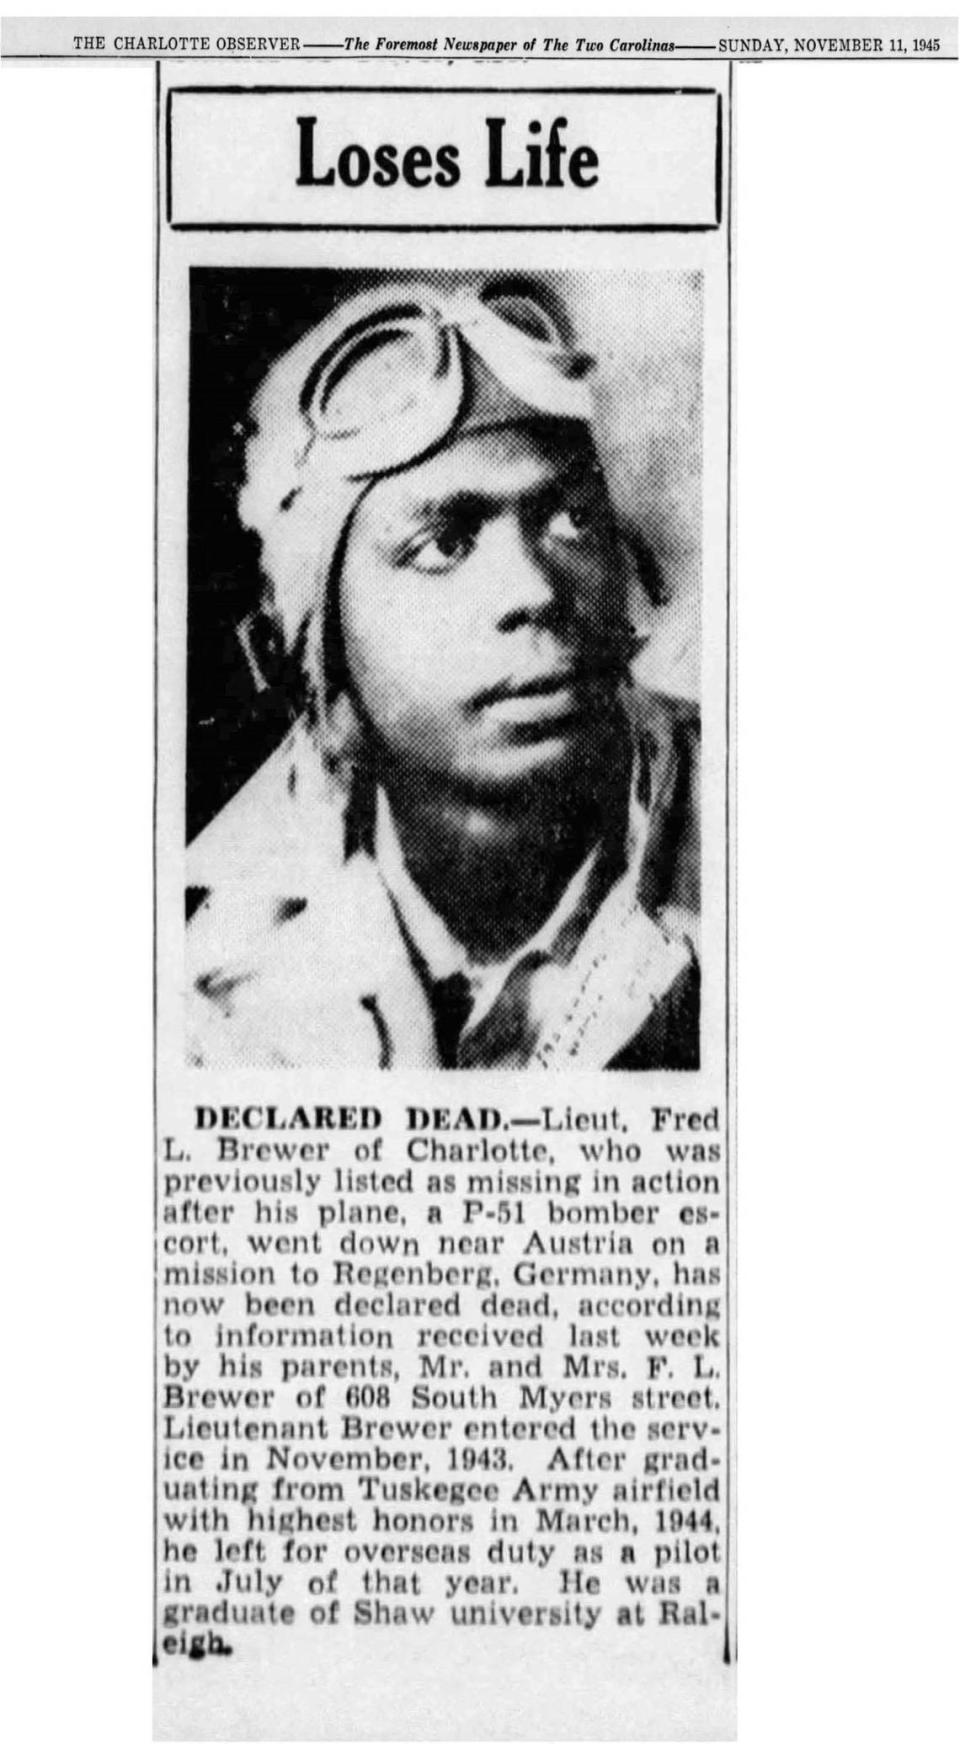 After serving in the U.S. Army as a pilot for about three months, second lieutenant Fred L. Brewer, of Charlotte, died.